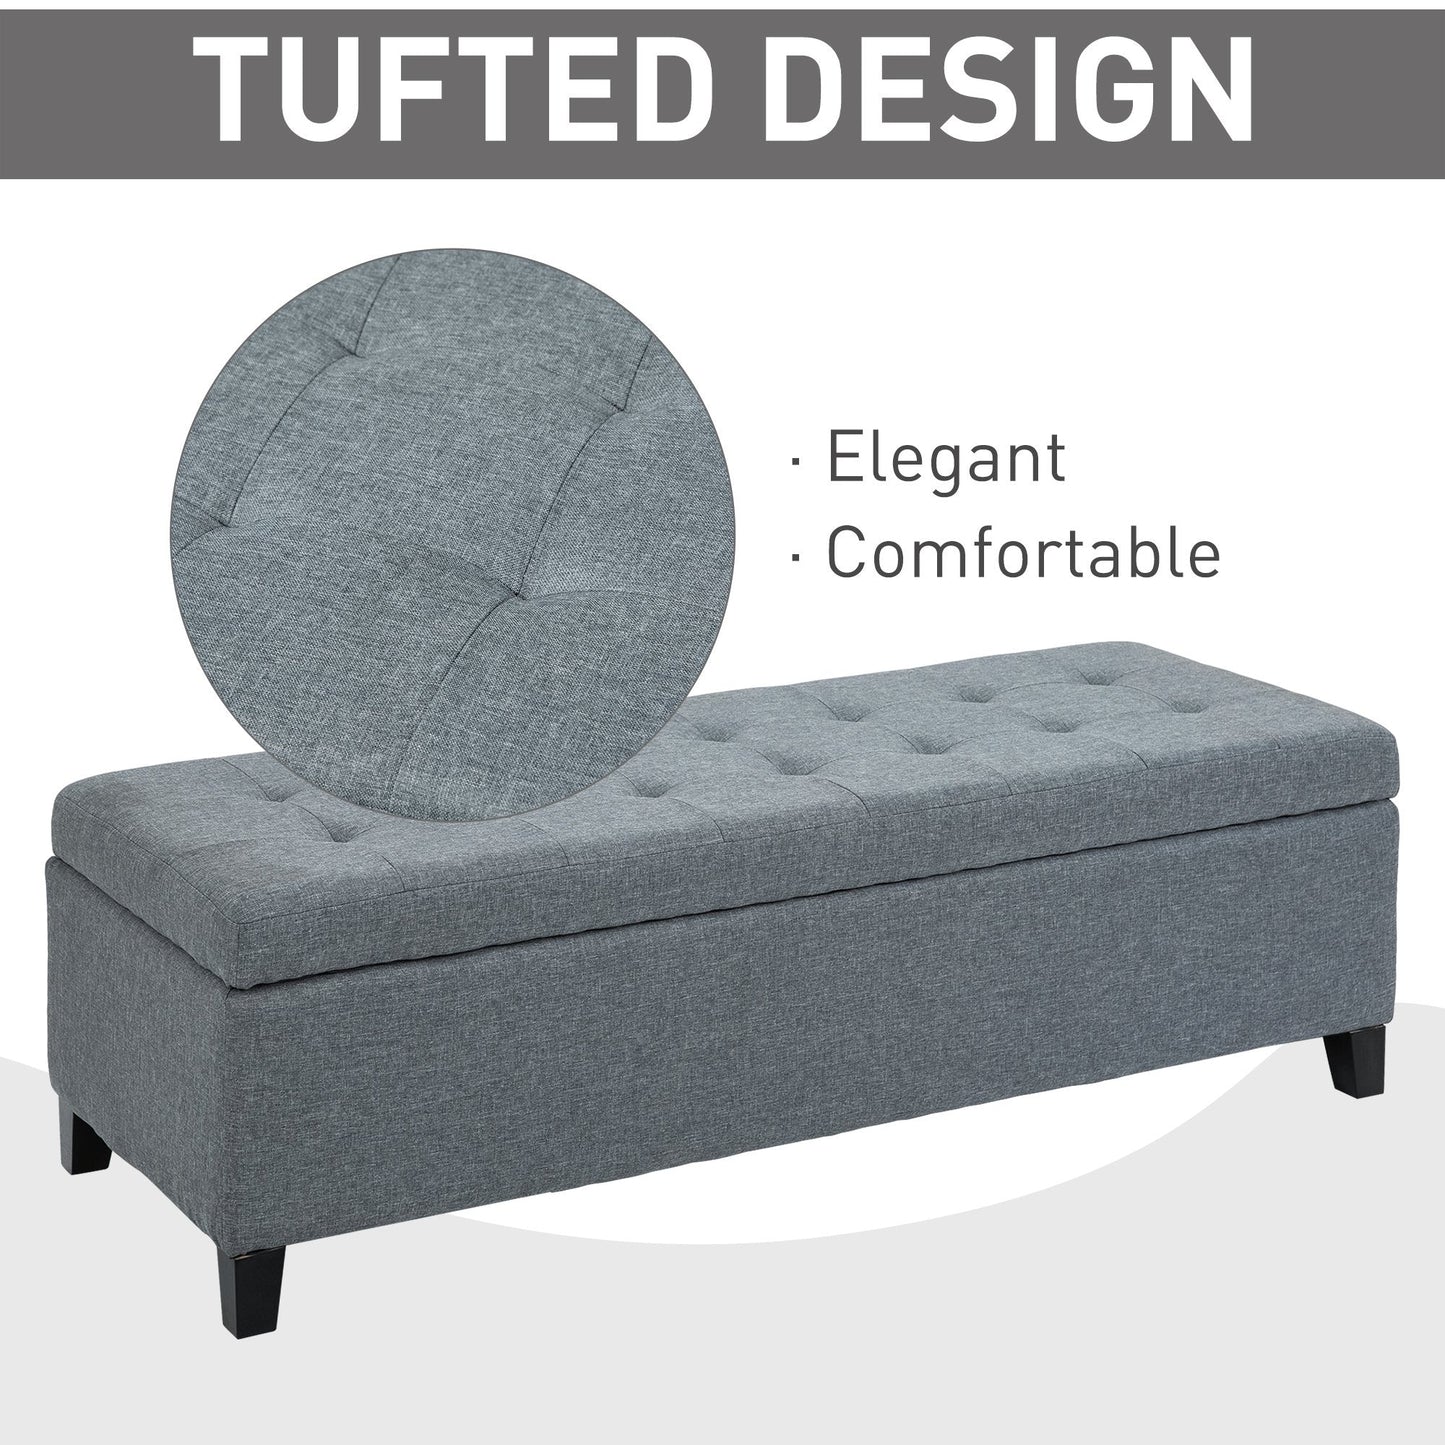 Large 50" Rectangular Storage Ottoman Bench, Tufted Upholstered Linen Fabric Wood Feet Entry Bench, Contemporary Home Decor Grey at Gallery Canada